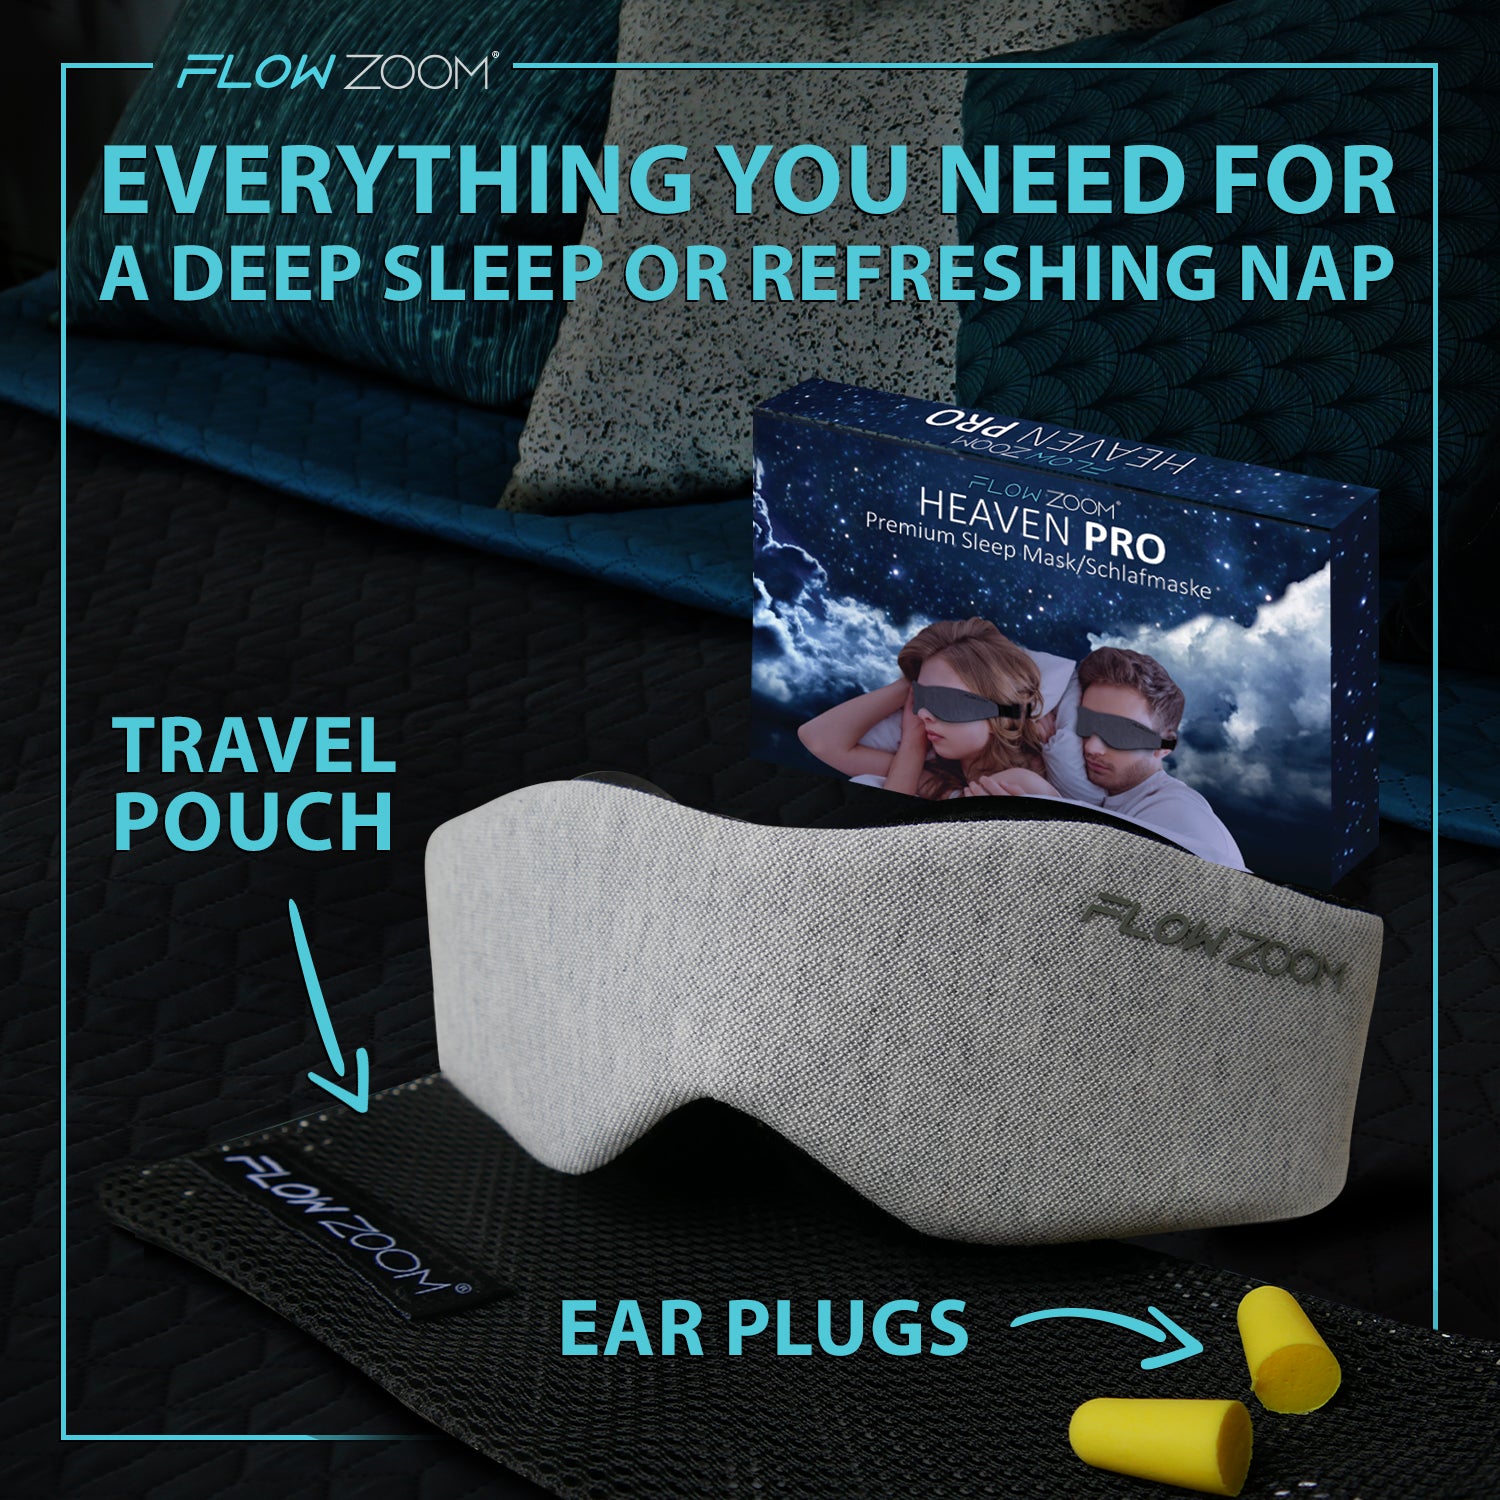 Sleep mask for side sleepers and travel pouch included.